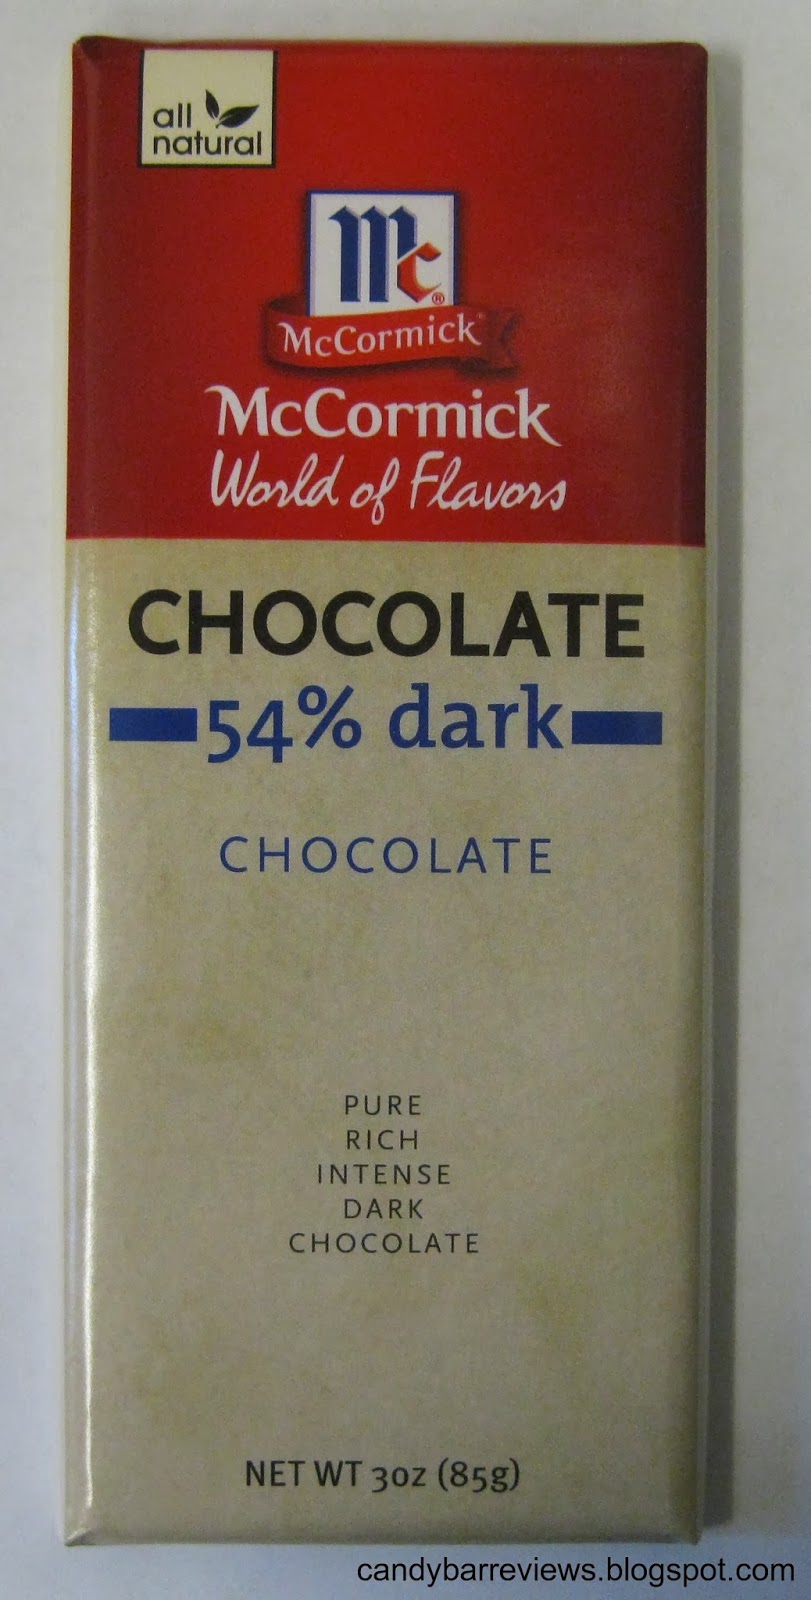 Candy Bar Reviews: McCormick World of Flavors Chocolate Bars, Part 1